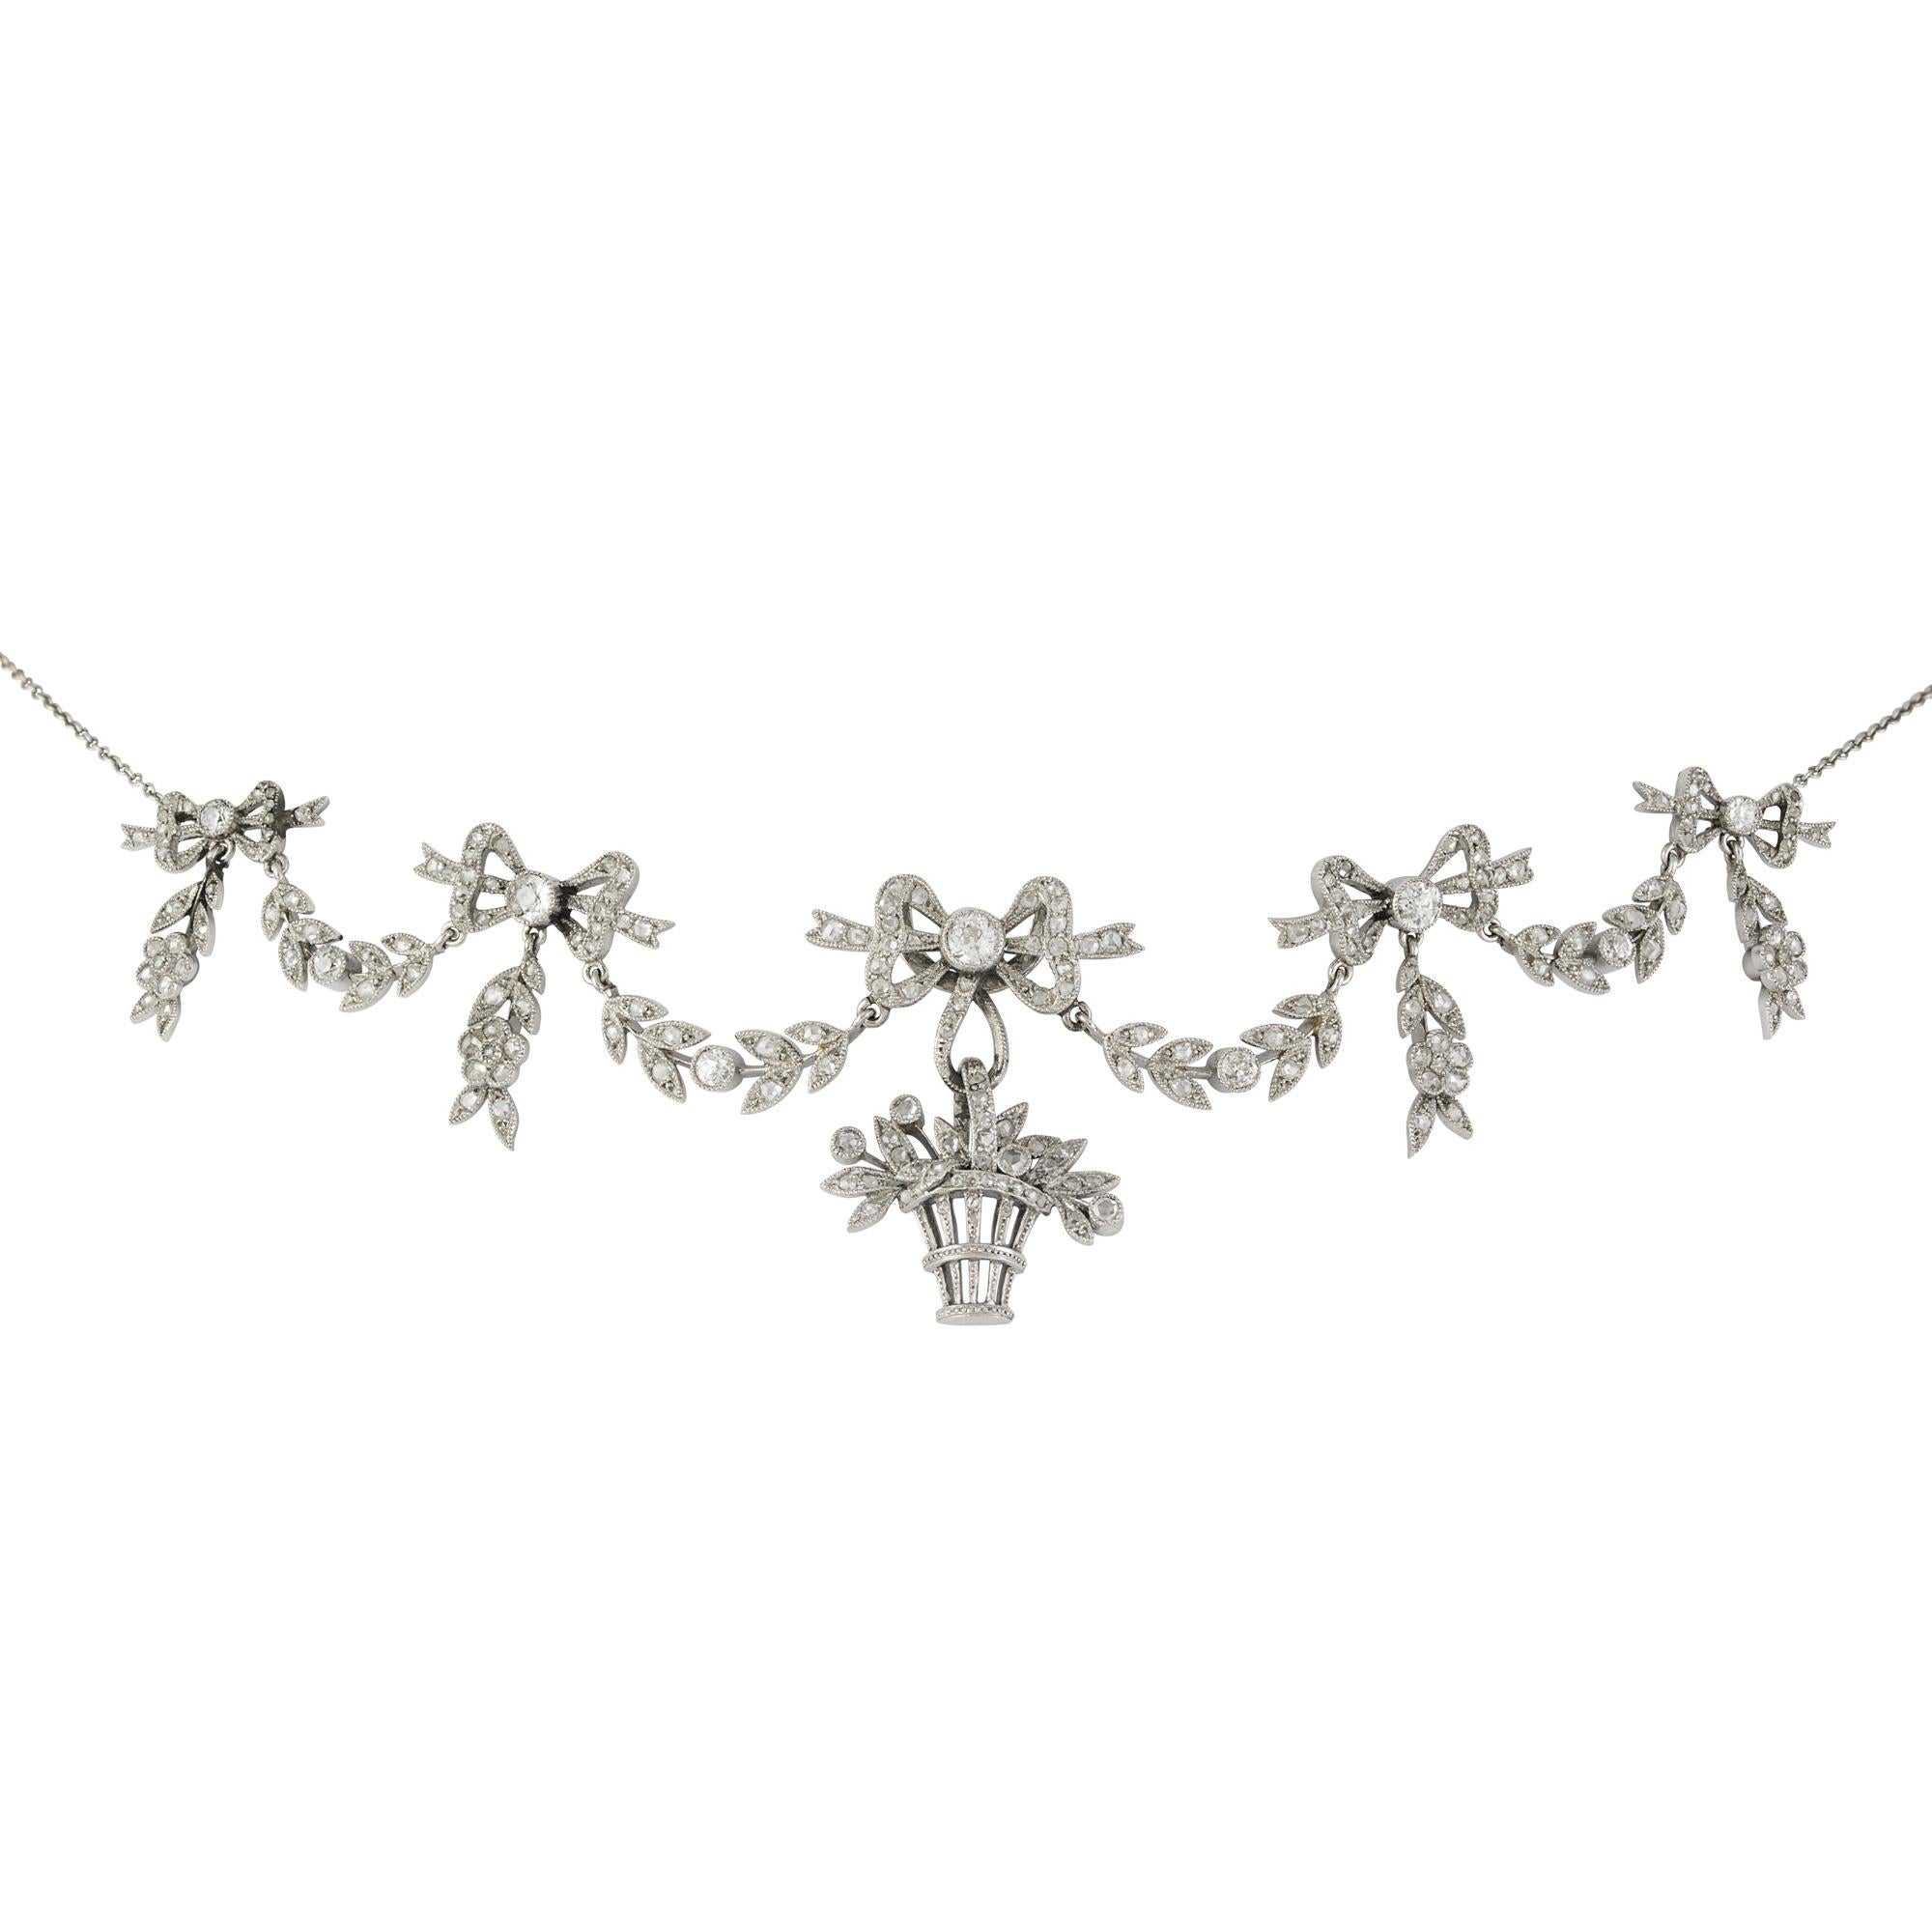 A Belle Epoque diamond necklace, of garland style, centred with a giardinetto motif, articulated beneath a ribbon bow surmount, to graduated swags tied by ribbon bows suspending foliate drops, millegrain set throughout in platinum with old brilliant